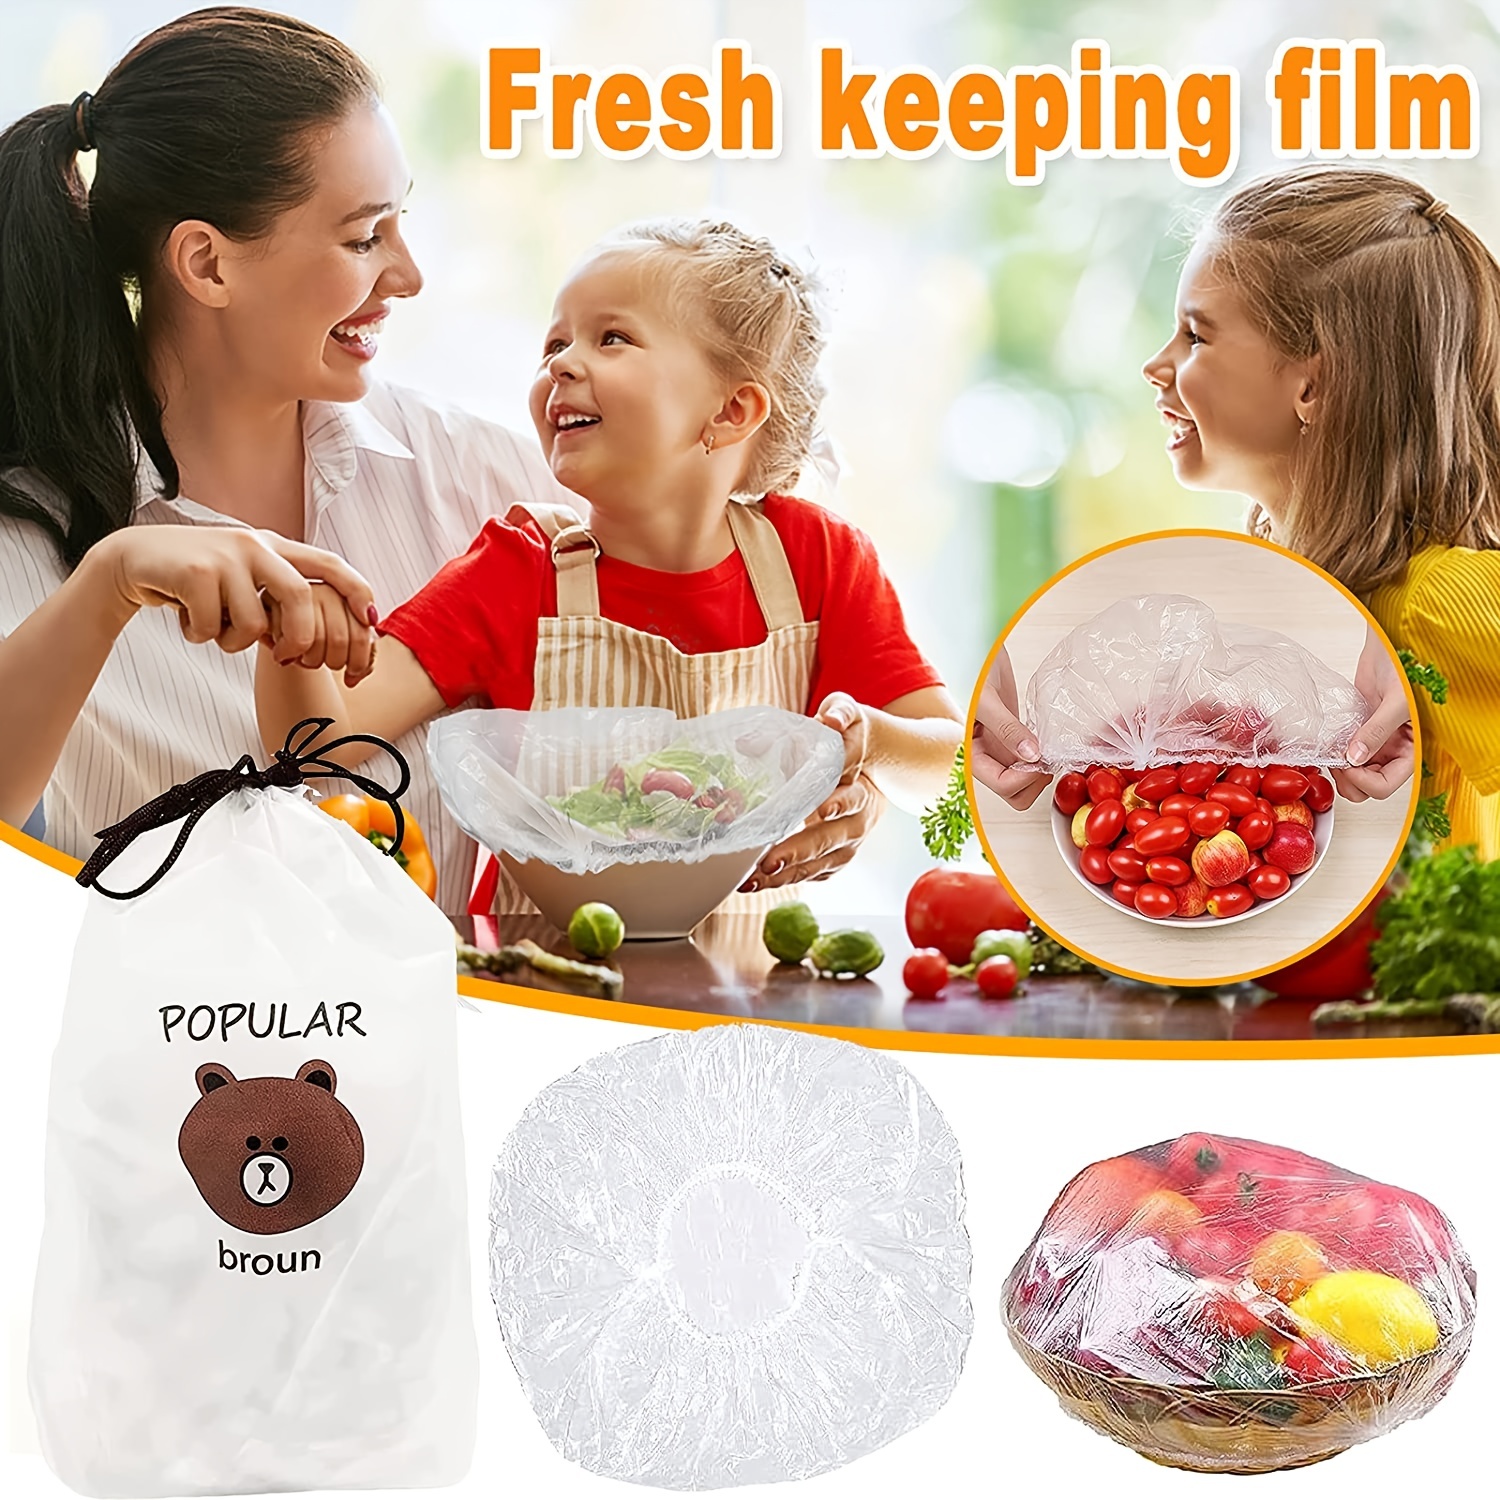 Reusable Fresh Food Storage Bags for Bowls Elastic Plate Silicone Lid  Covers Fresh Food Pouch Vacuum Bags Women Shower Caps - AliExpress